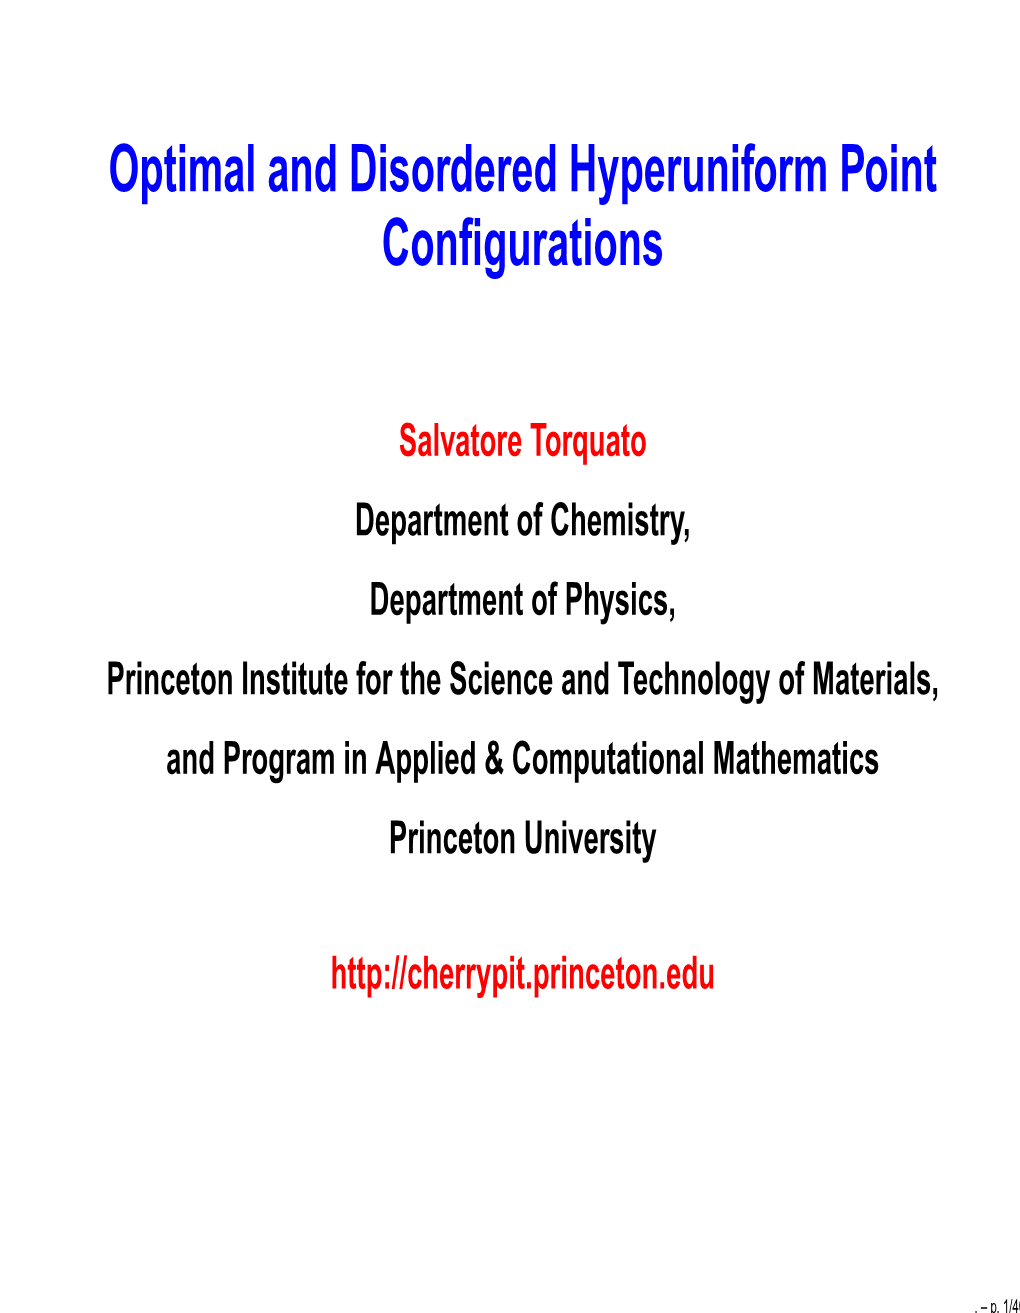 Optimal and Disordered Hyperuniform Point Configurations